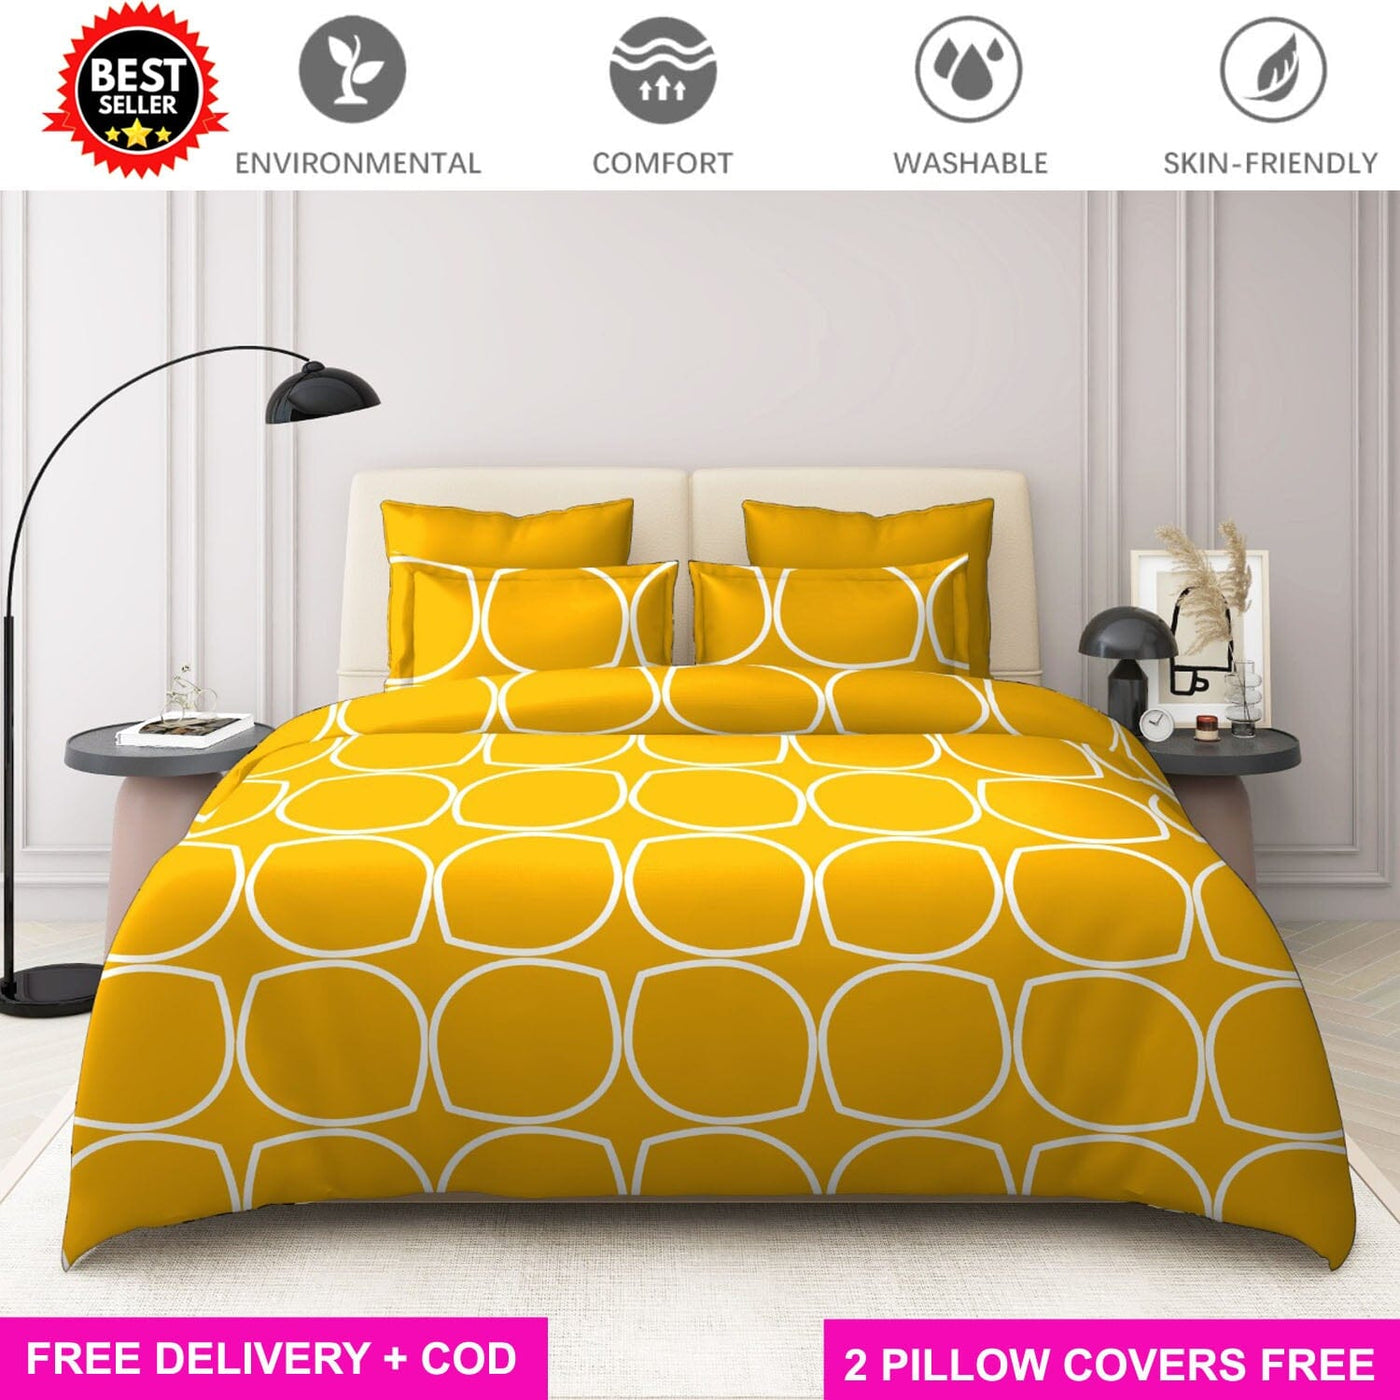 Cotton Elastic Fitted Bedsheet with 2 Pillow Covers - Fits with any Beds & Mattresses Great Happy IN Yellow Ellipse KING SIZE 